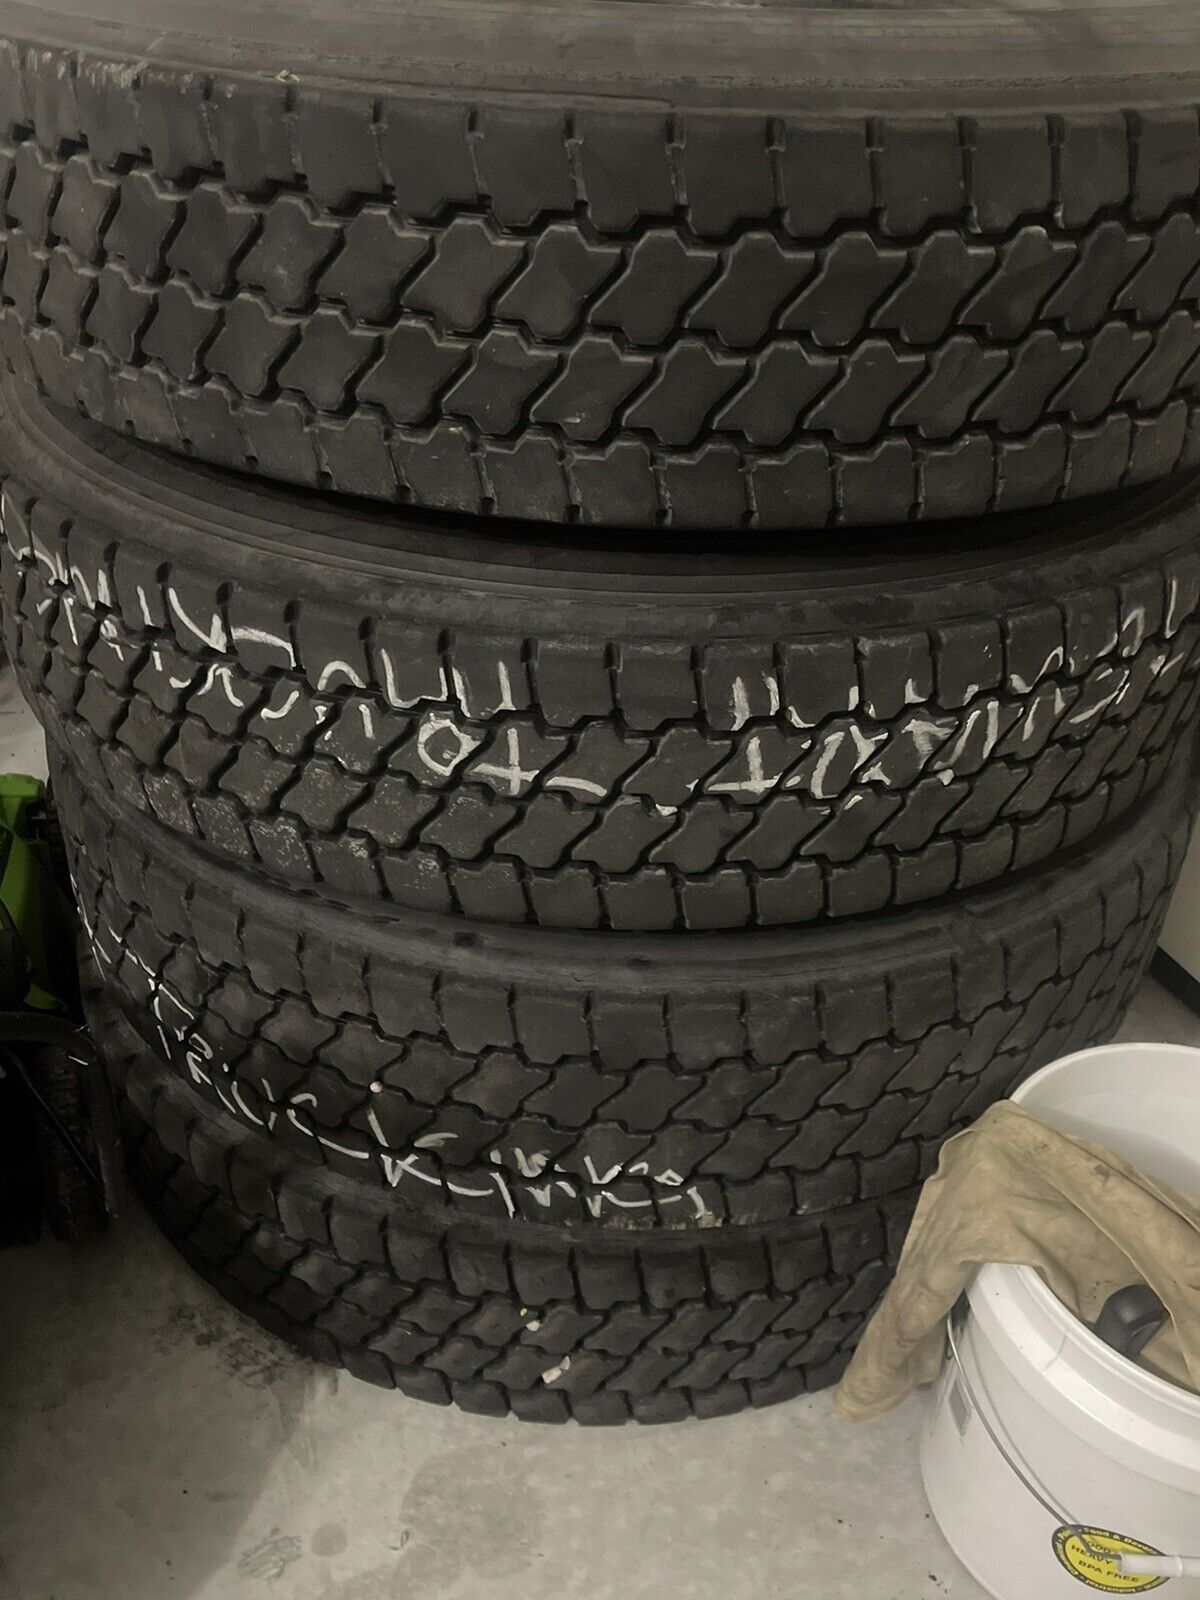 3 Recap Tractor Tires 11R 22.5 16PR $75 Each or $200 For All 3